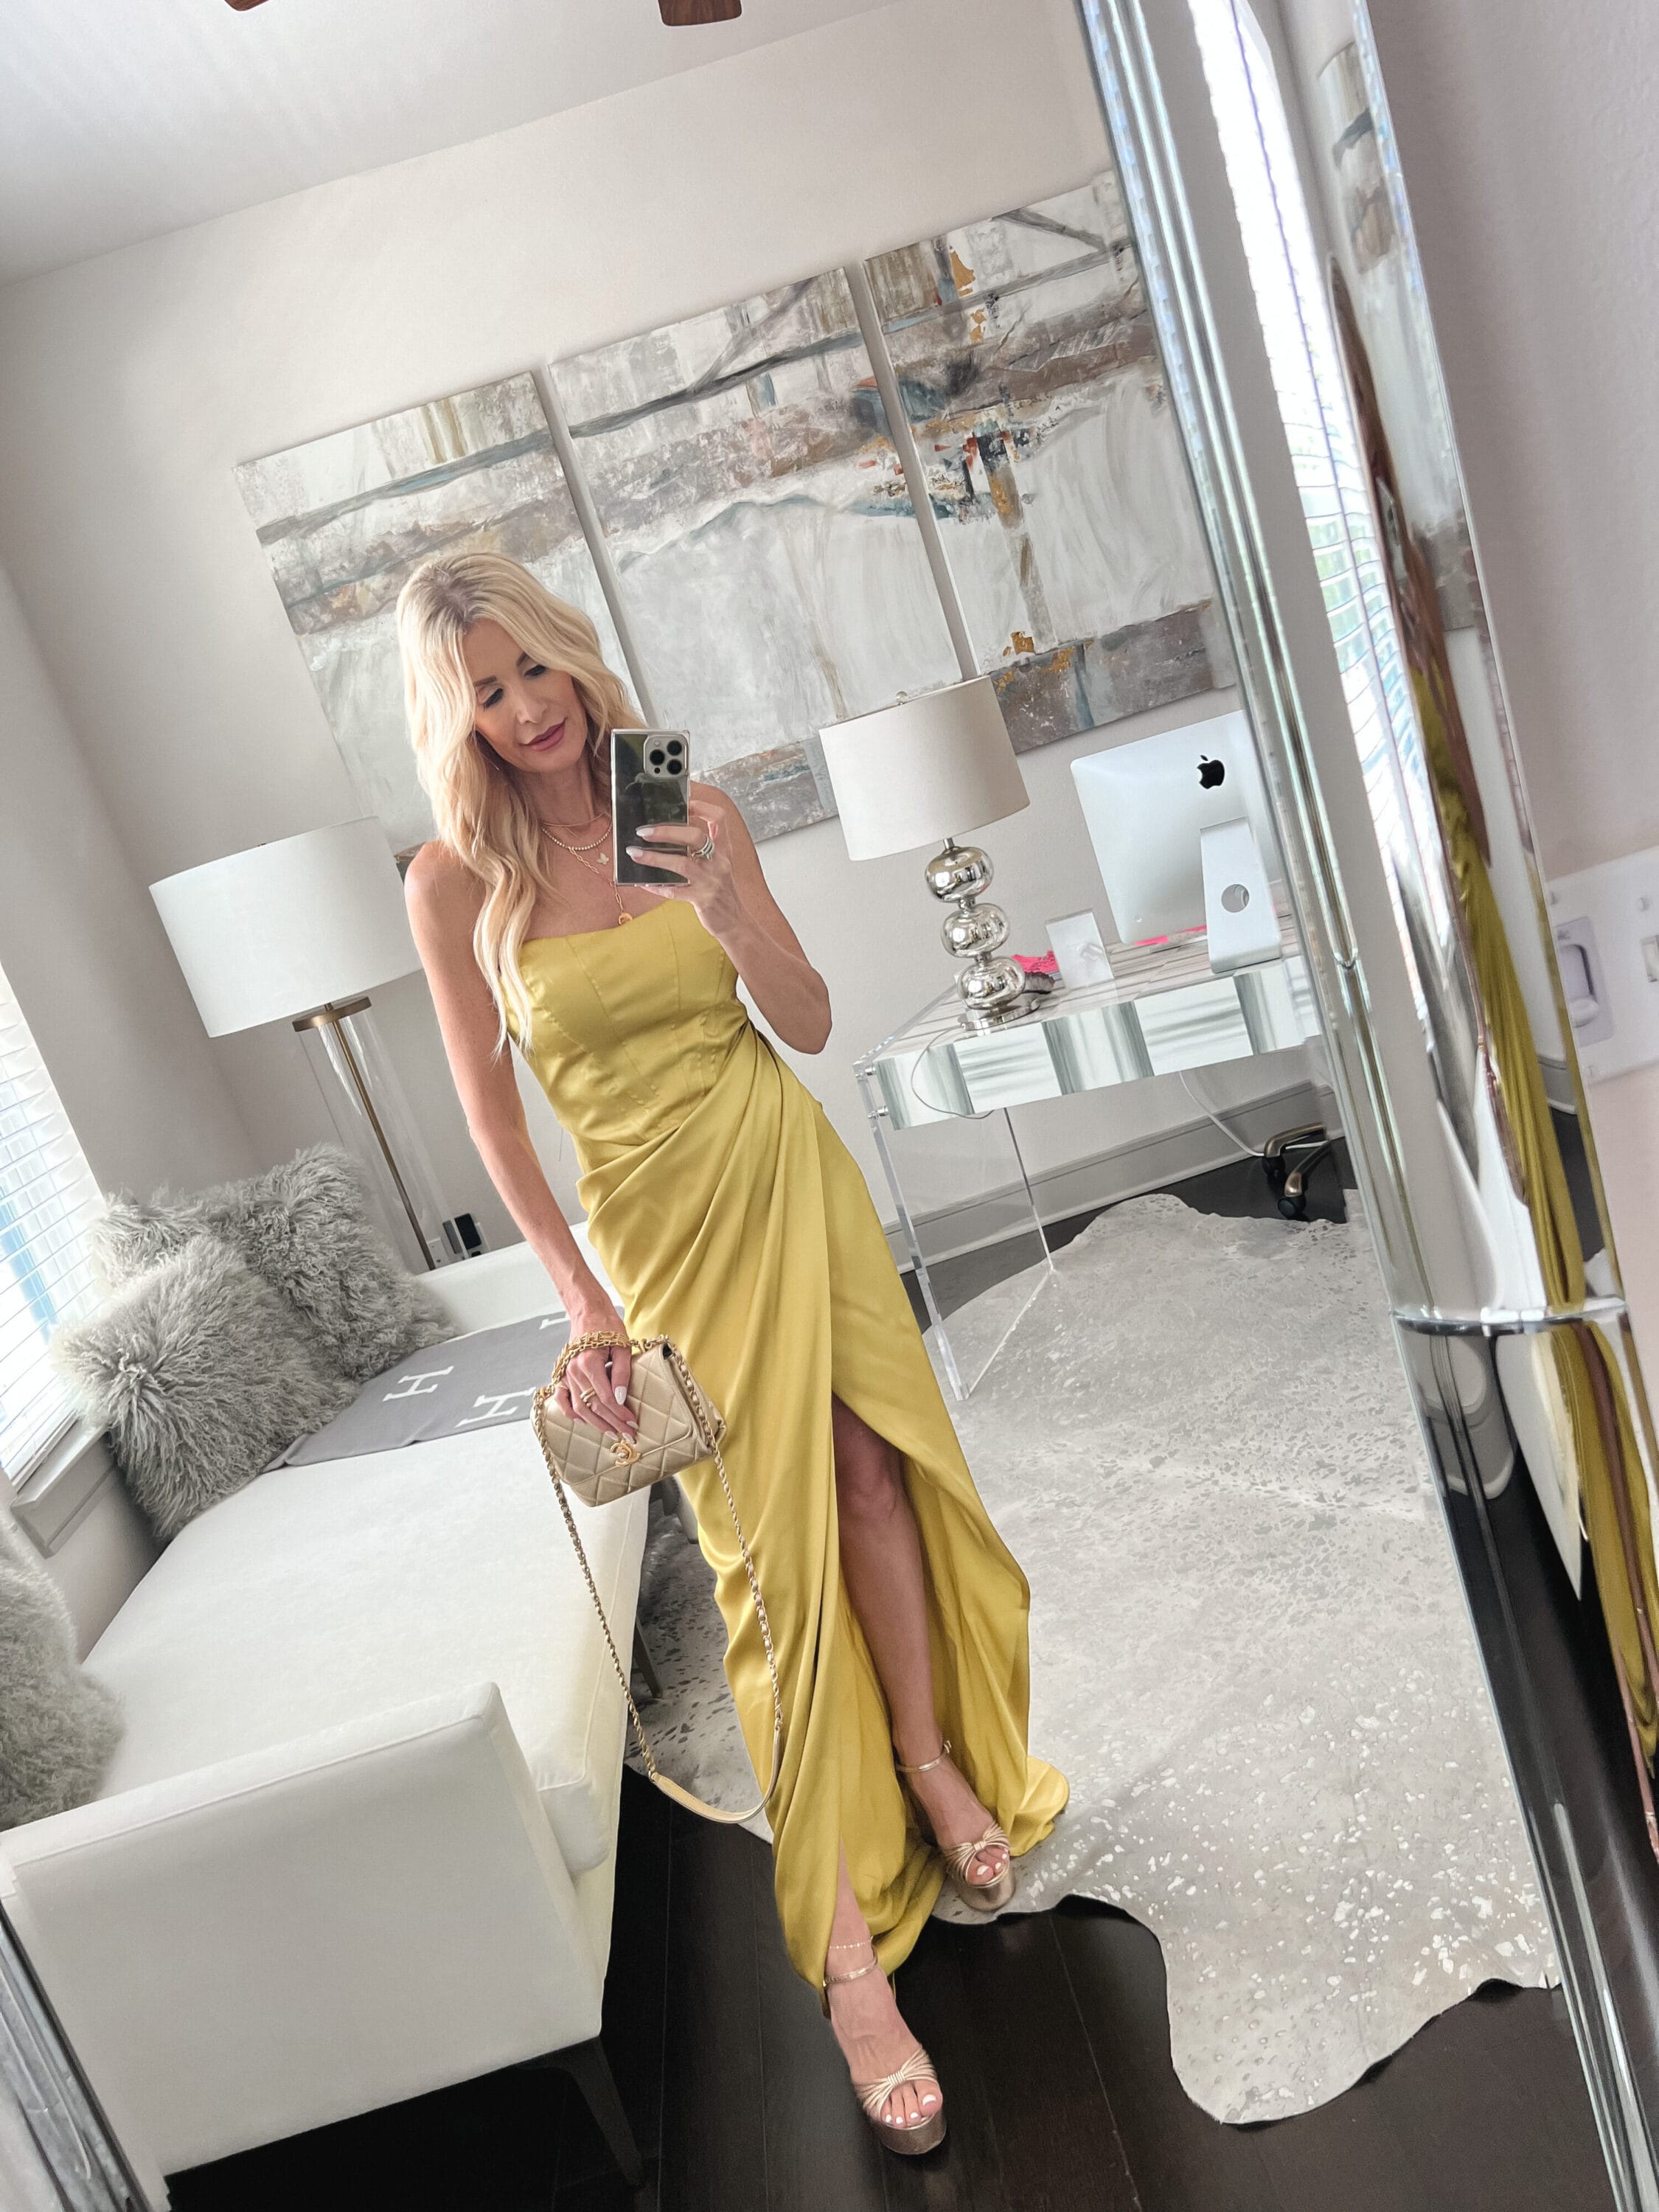 Over 40 fashion blogger wearing a yellow maxi dress with gold platforms as one of 7 summer dresses for 7 occasions.